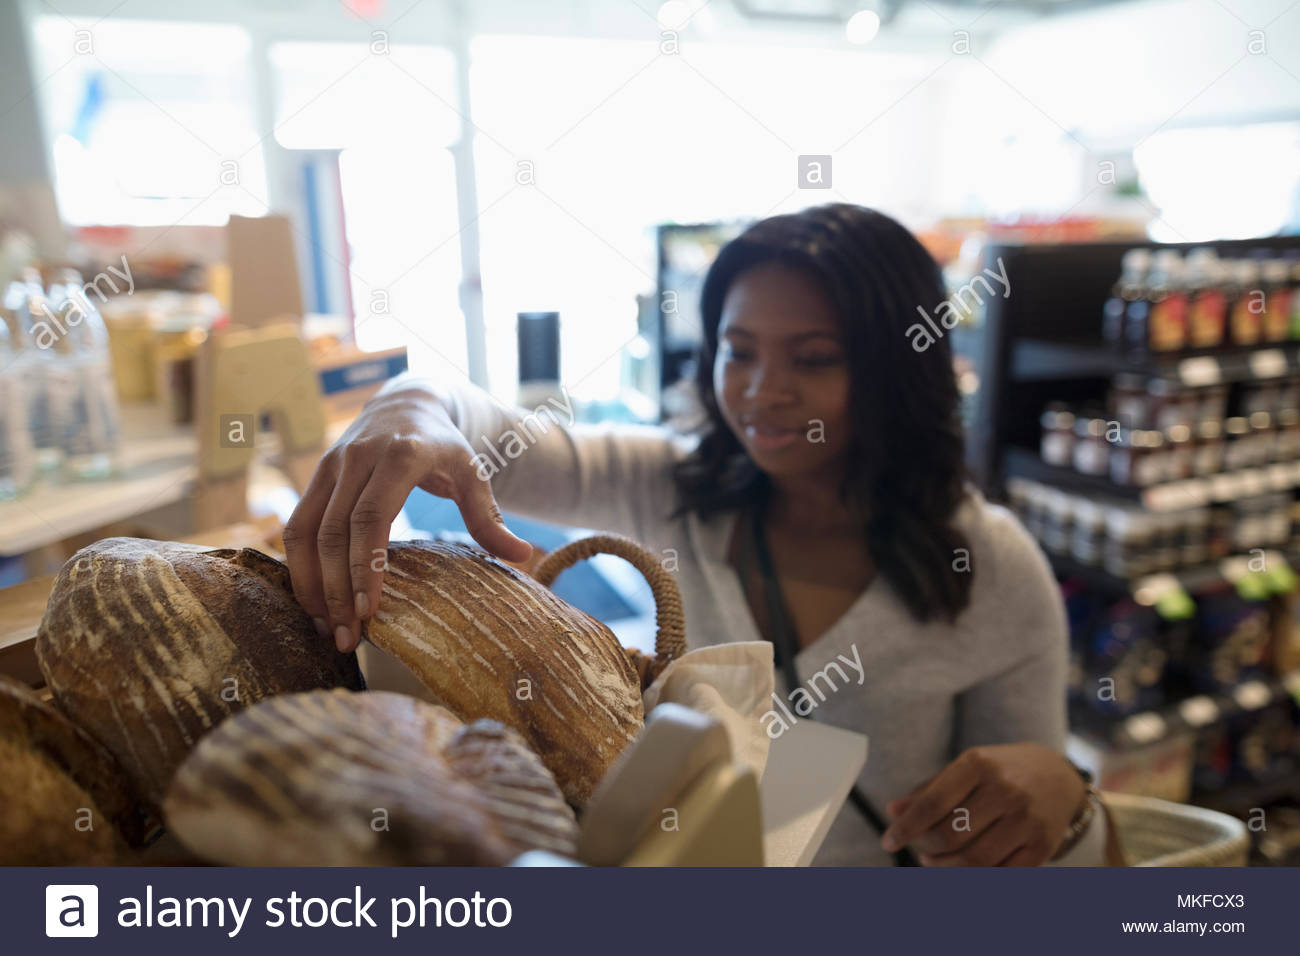 Young woman grocery shopping, reaching for fresh bread in market Stock Photo